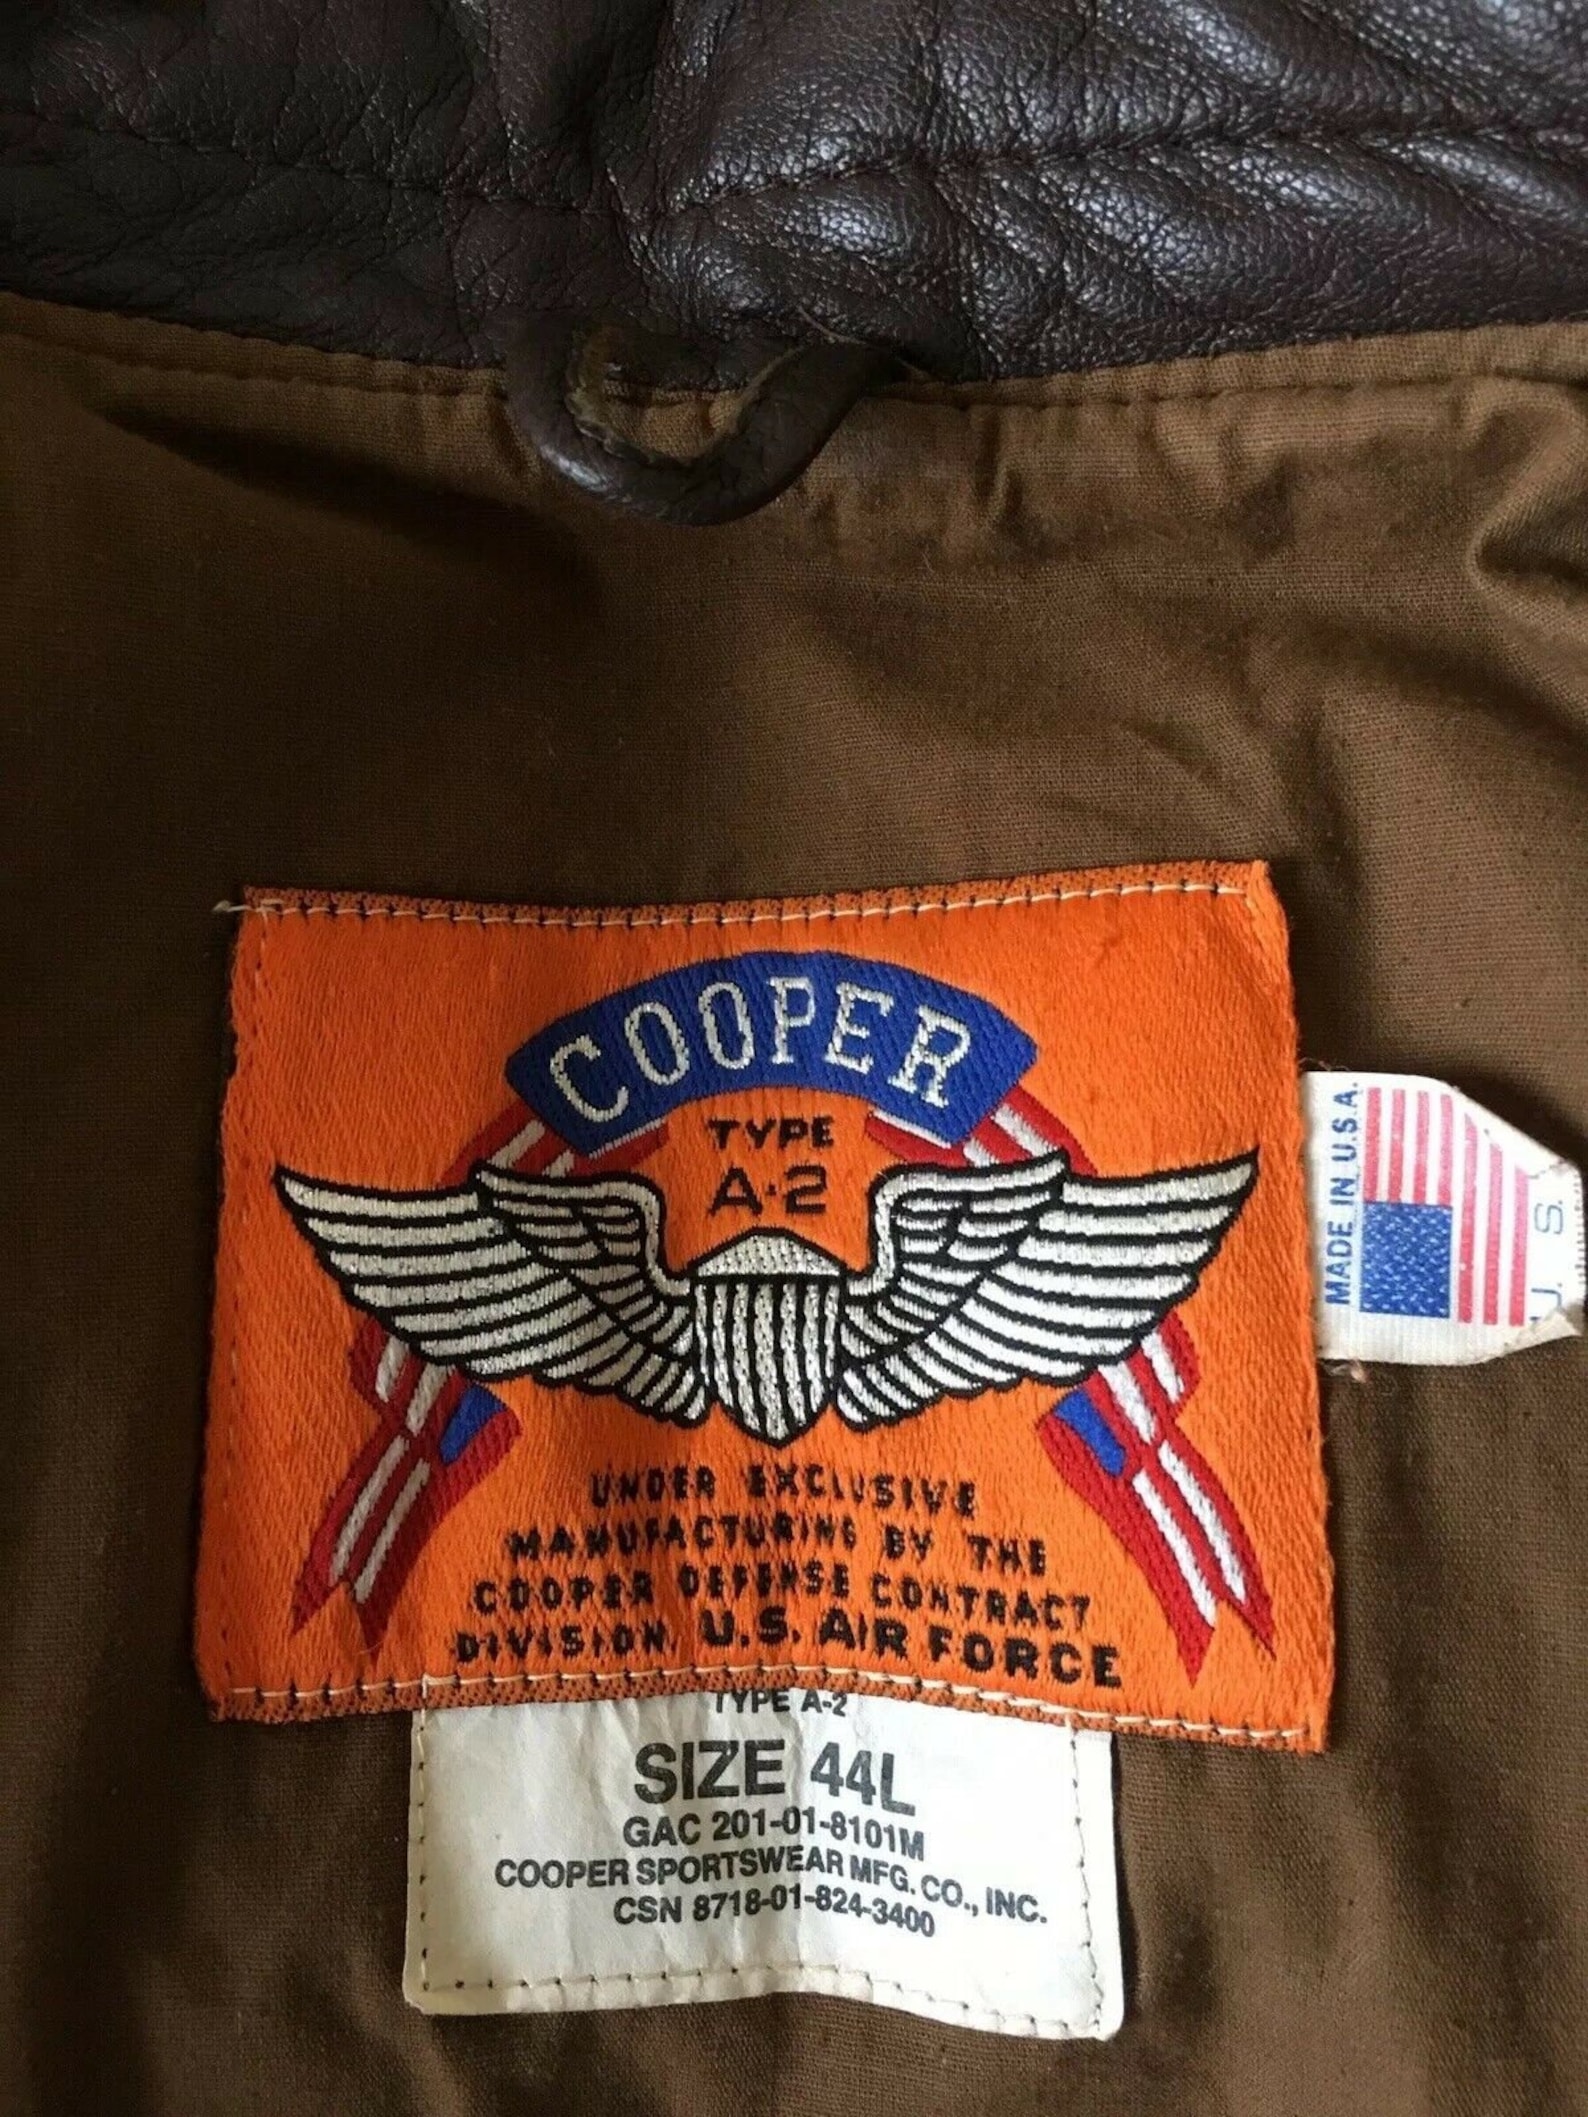 Cooper A-2 US AIRFORCE Leather Bomber Jacket Brown 44L | Etsy